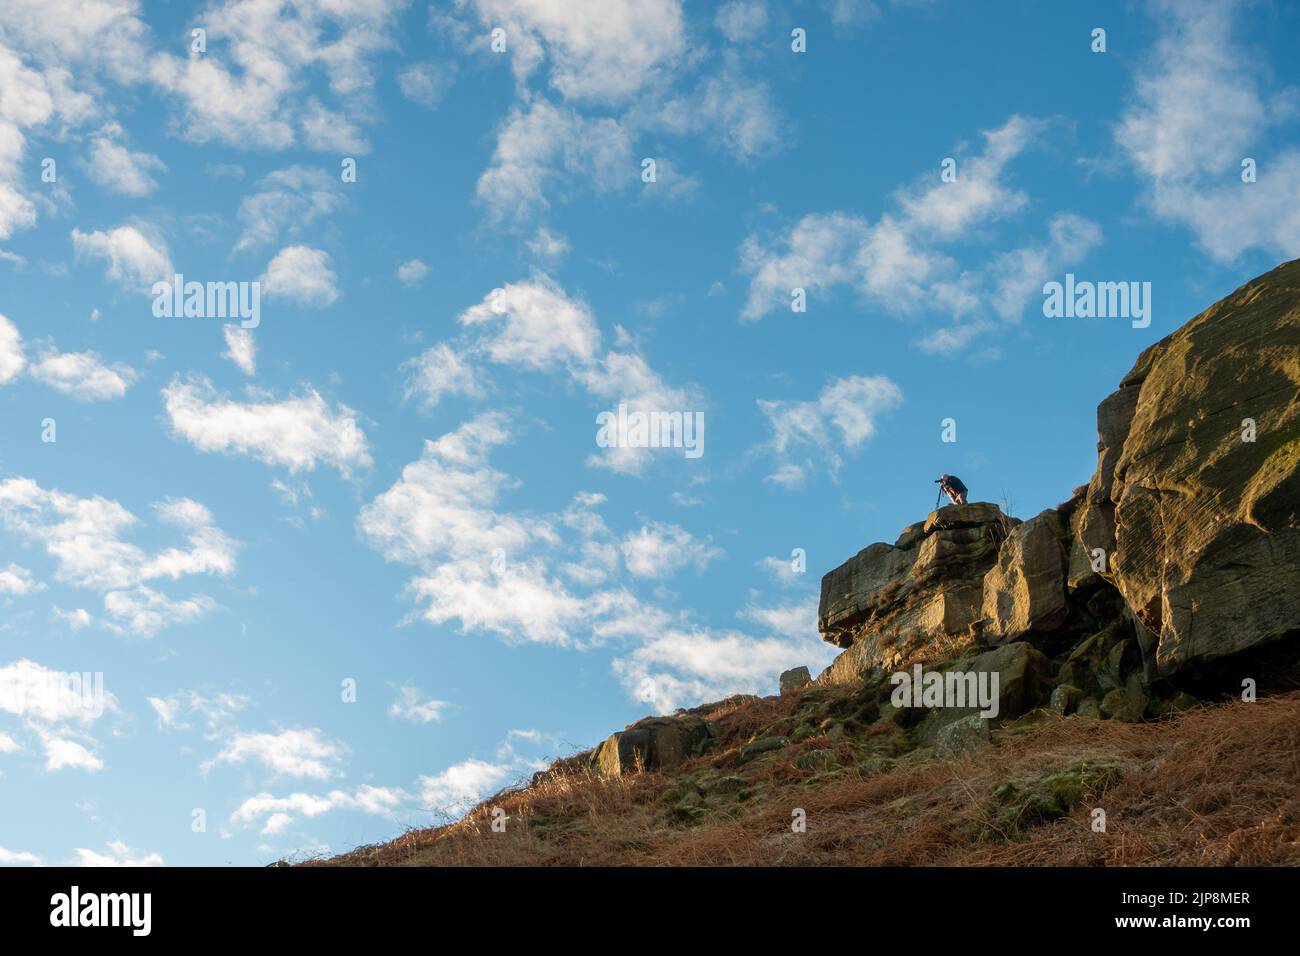 Photographer with tripod photographing sunrise from the Cow and Calf Rocks, Ilkley Moor, England. Stock Photo